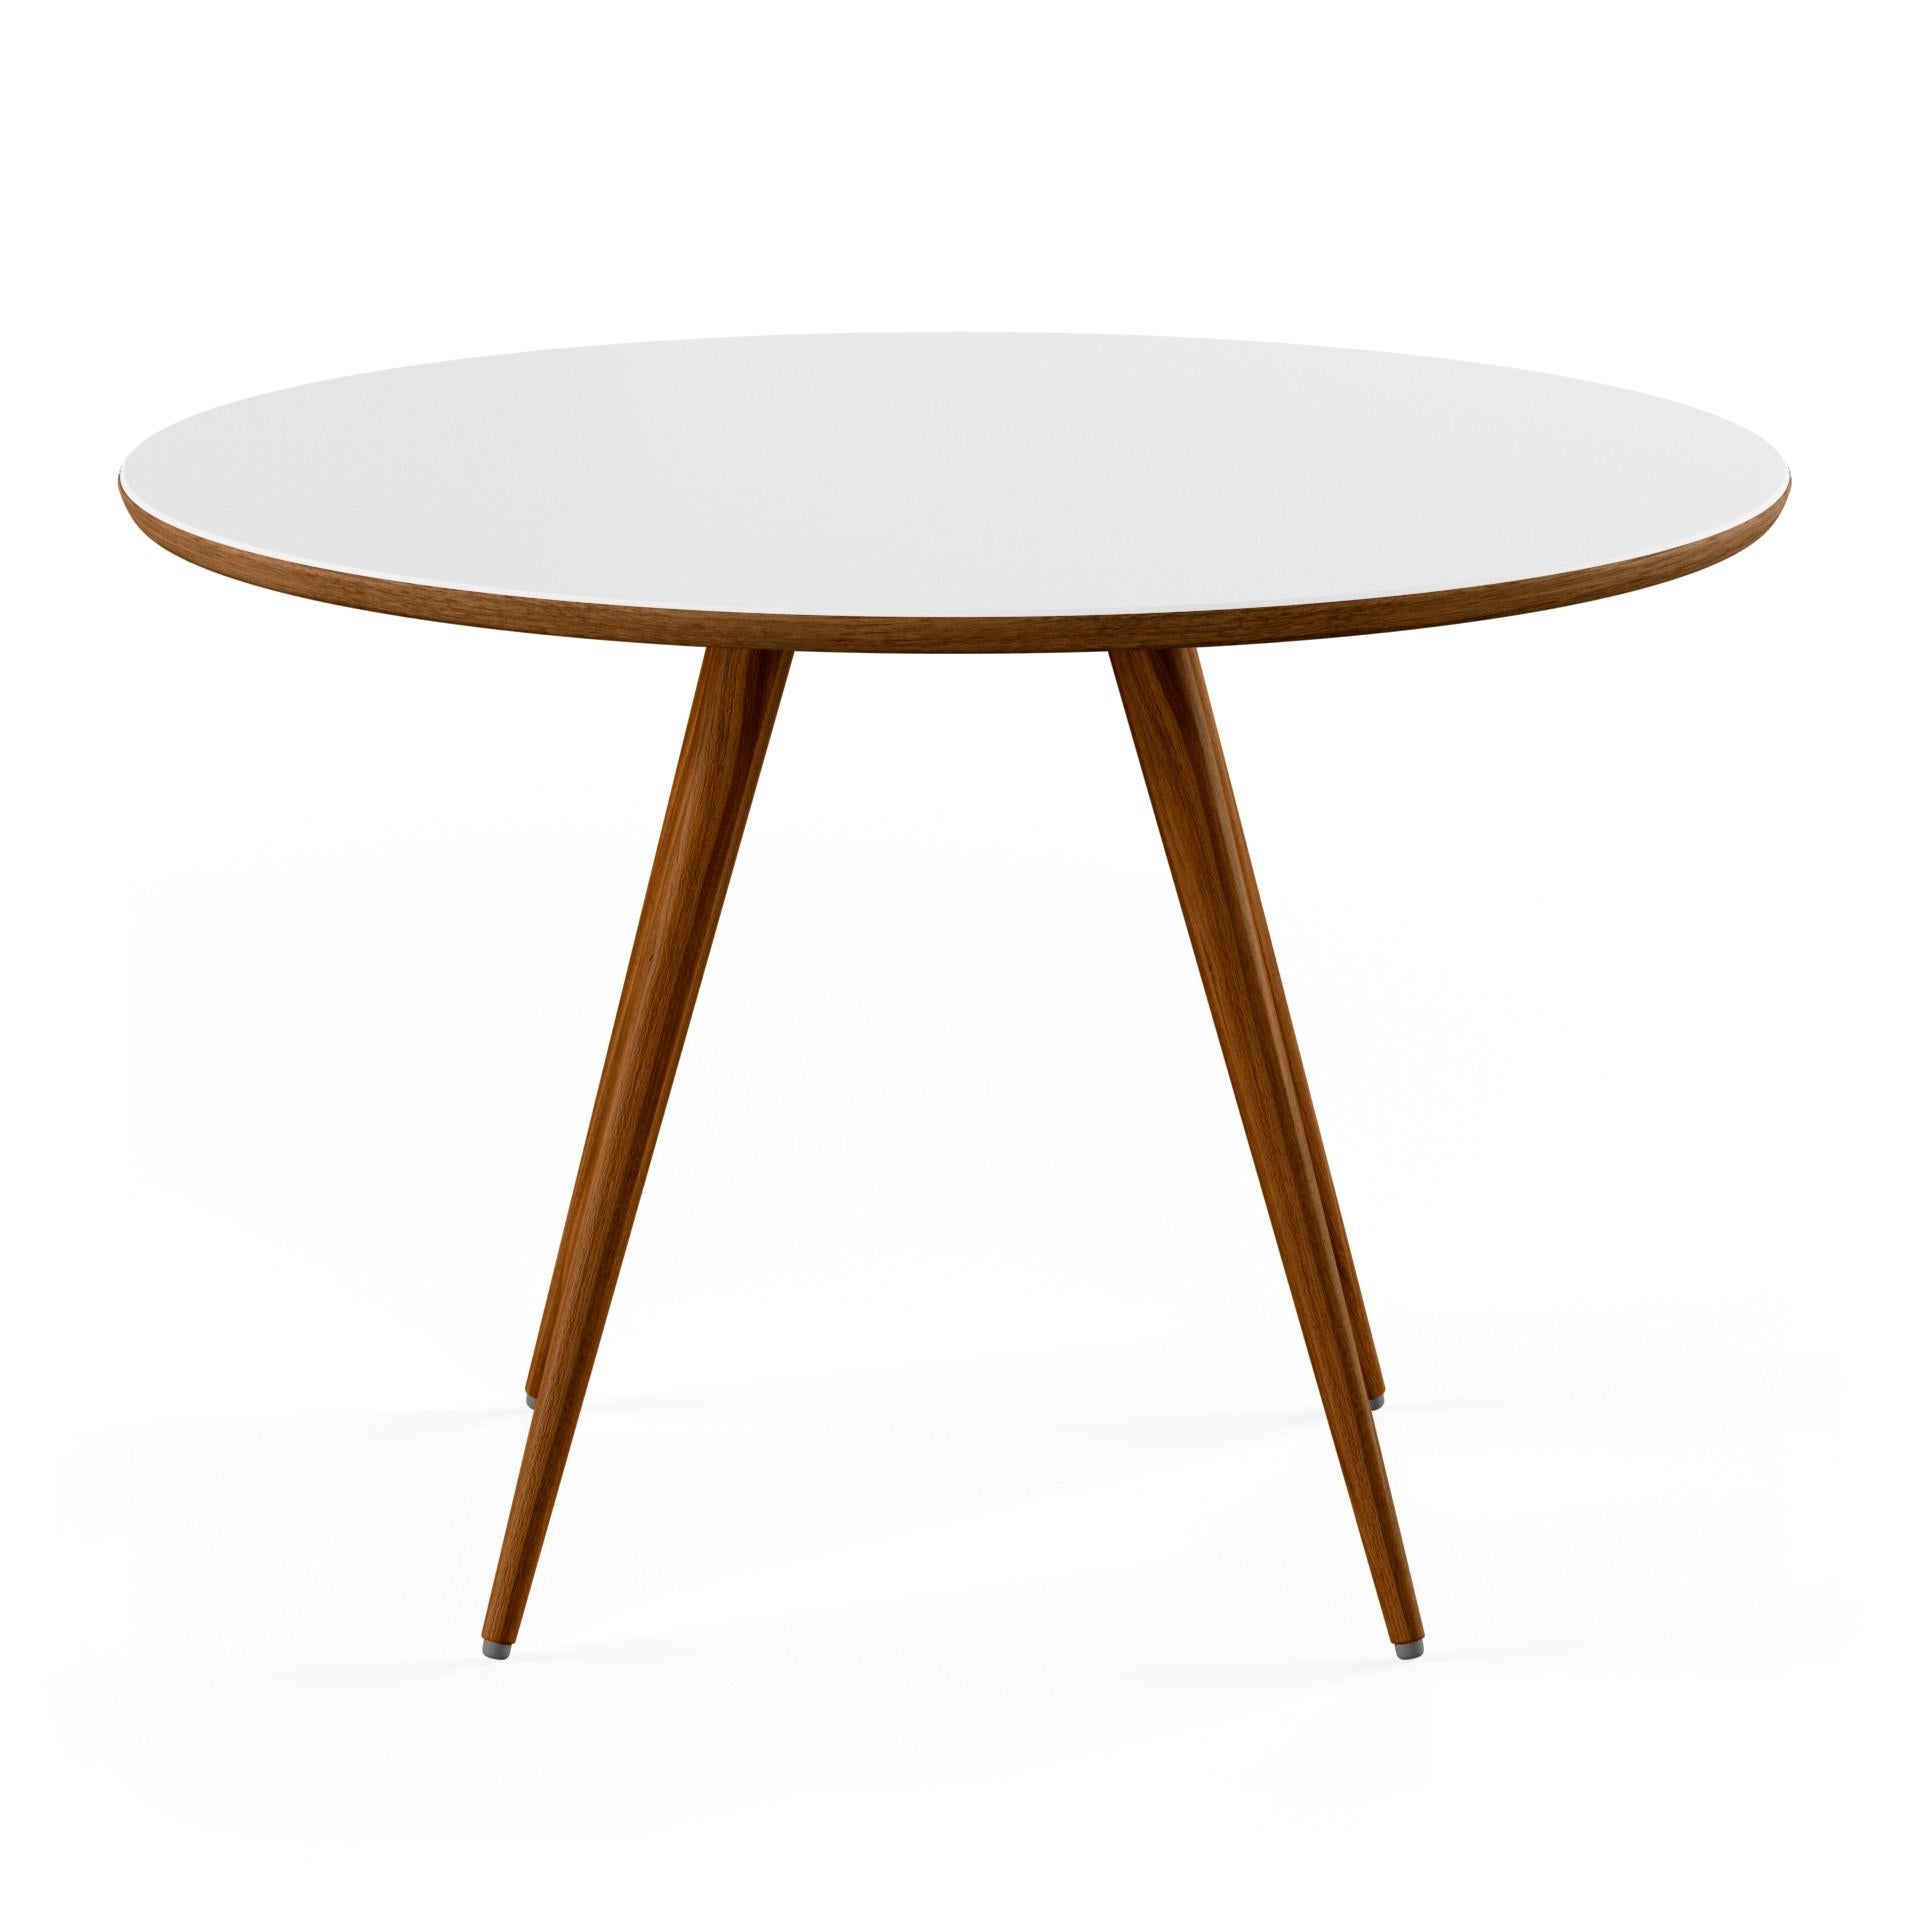 The GM 3900 Edge table series is not only elegant in appearance – it is also a pleasure to use in everyday life. The table is made entirely of solid wood or with a top of Corian, which in combination with the selected wood type beautifully